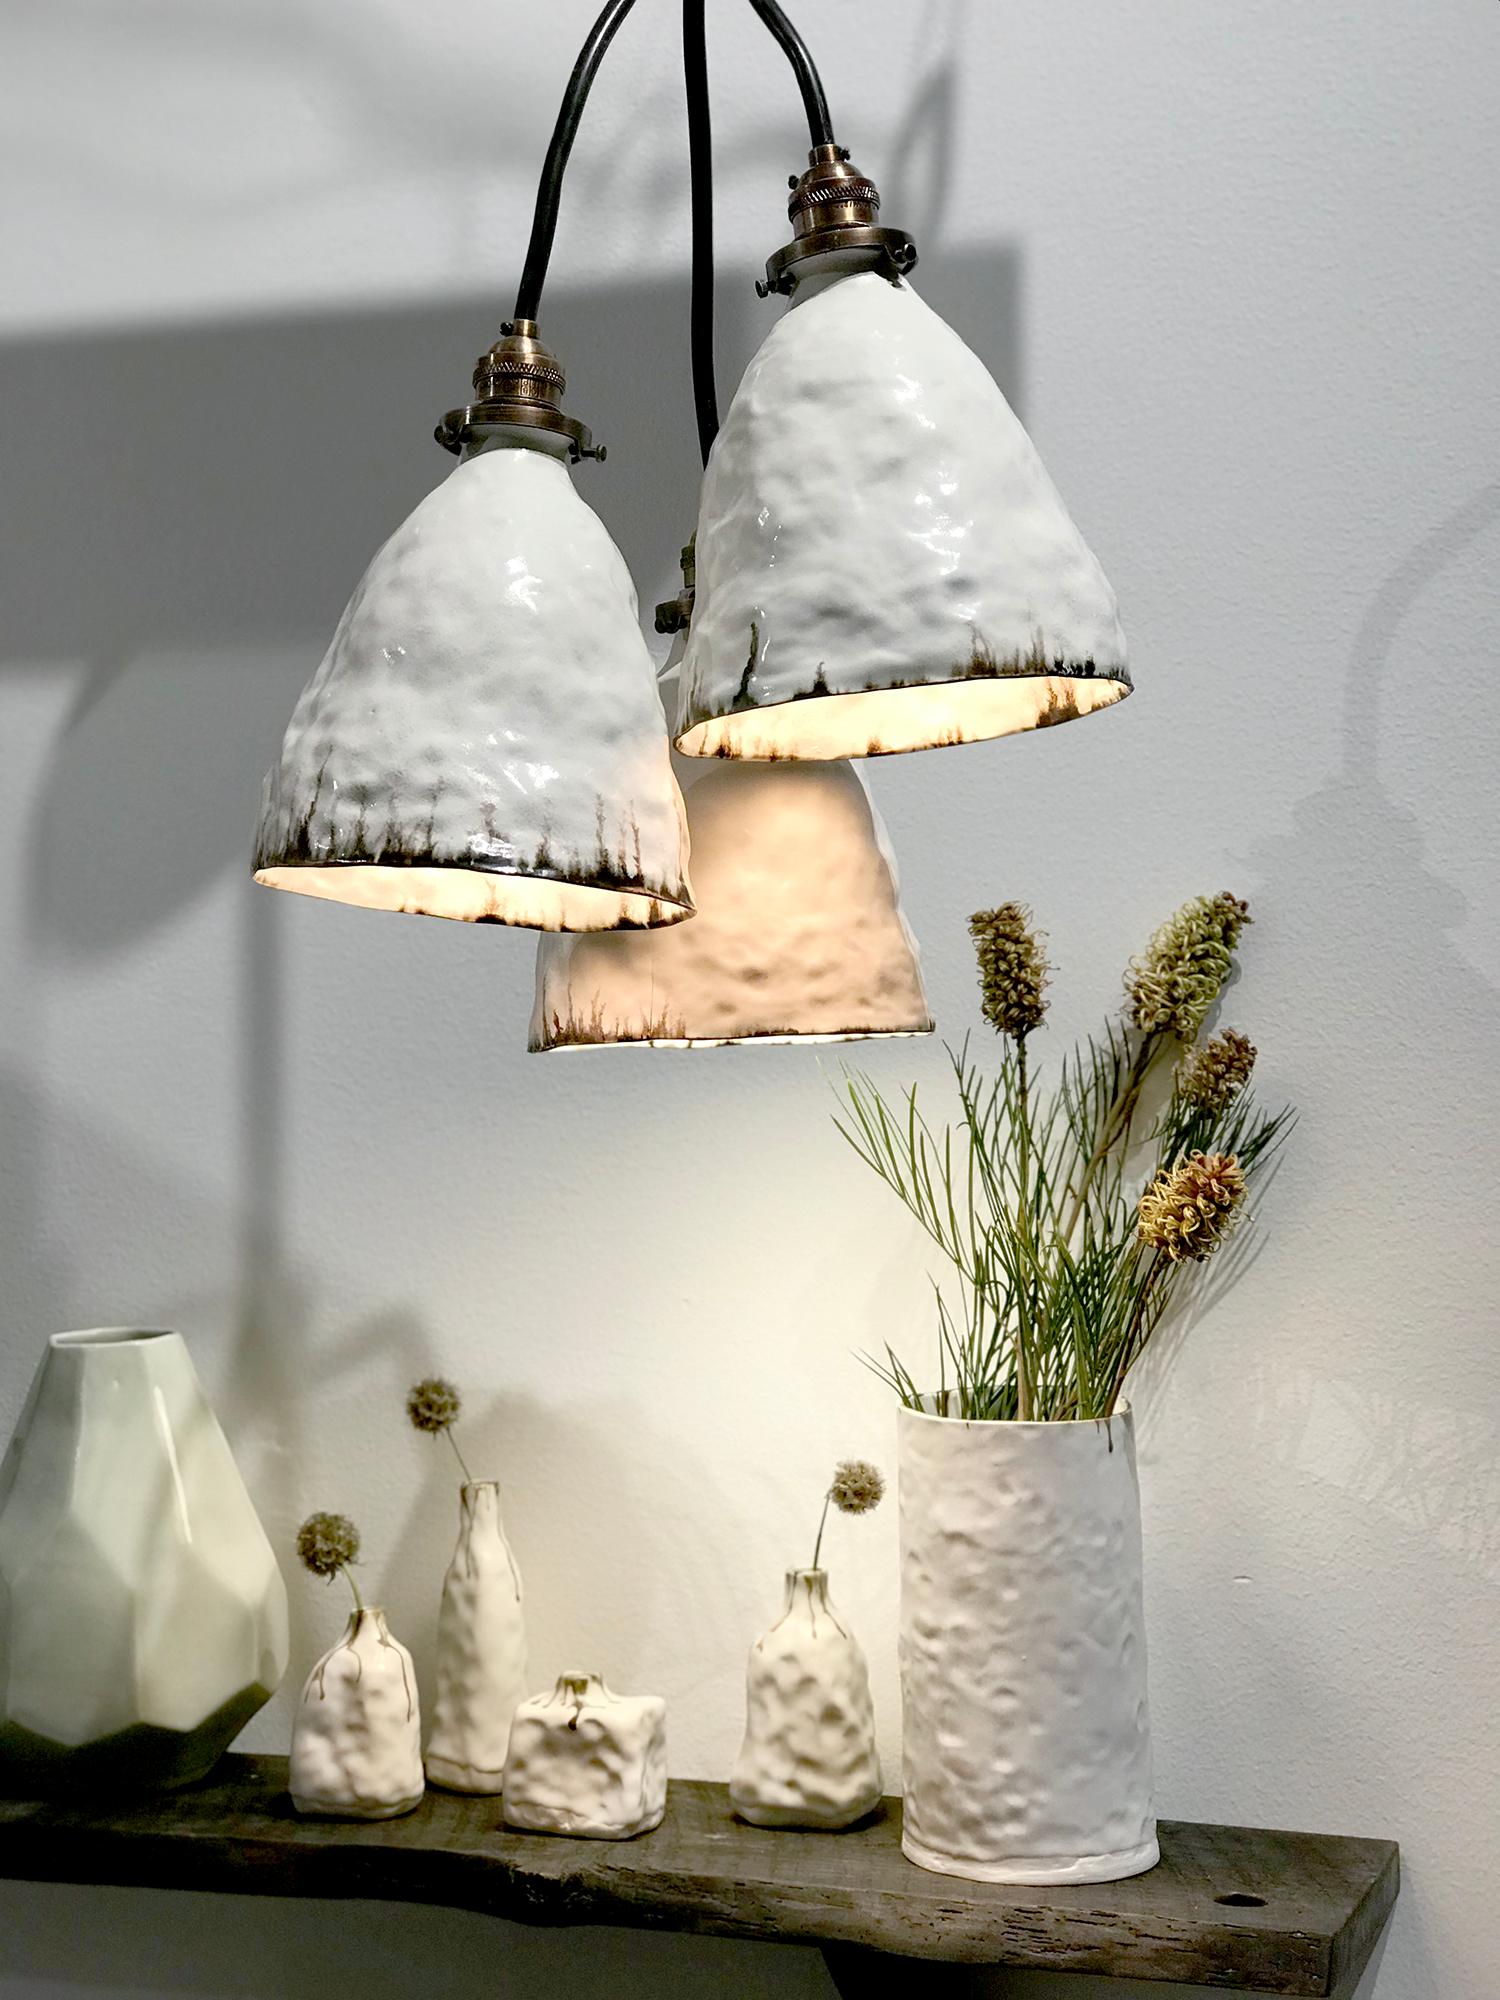 We've combined the comfort of rustic forms in porcelain with the industrial vibe of antiqued bronze elements to create a unique pendant light. The three porcelain shades are hand cast in porcelain, glazed in either warm white snowflake glaze and